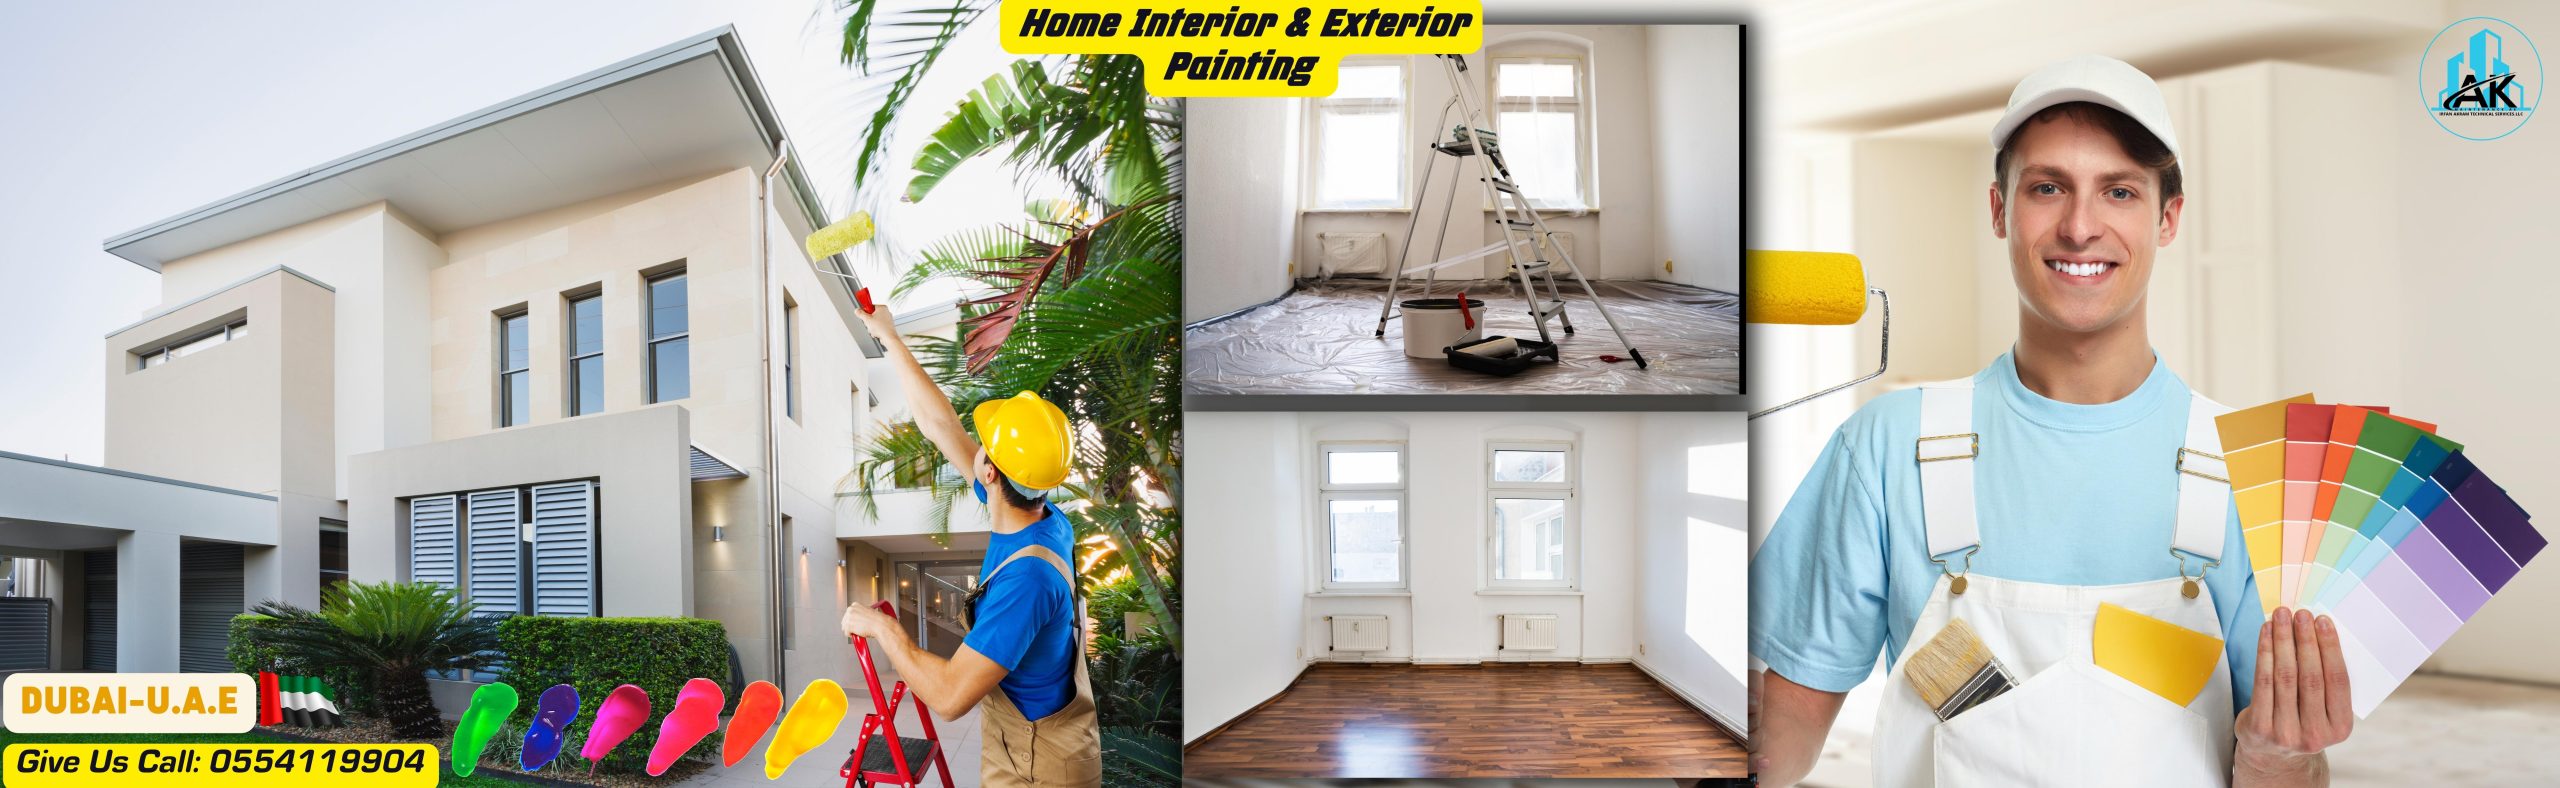 Painter Painting Home in Dubai